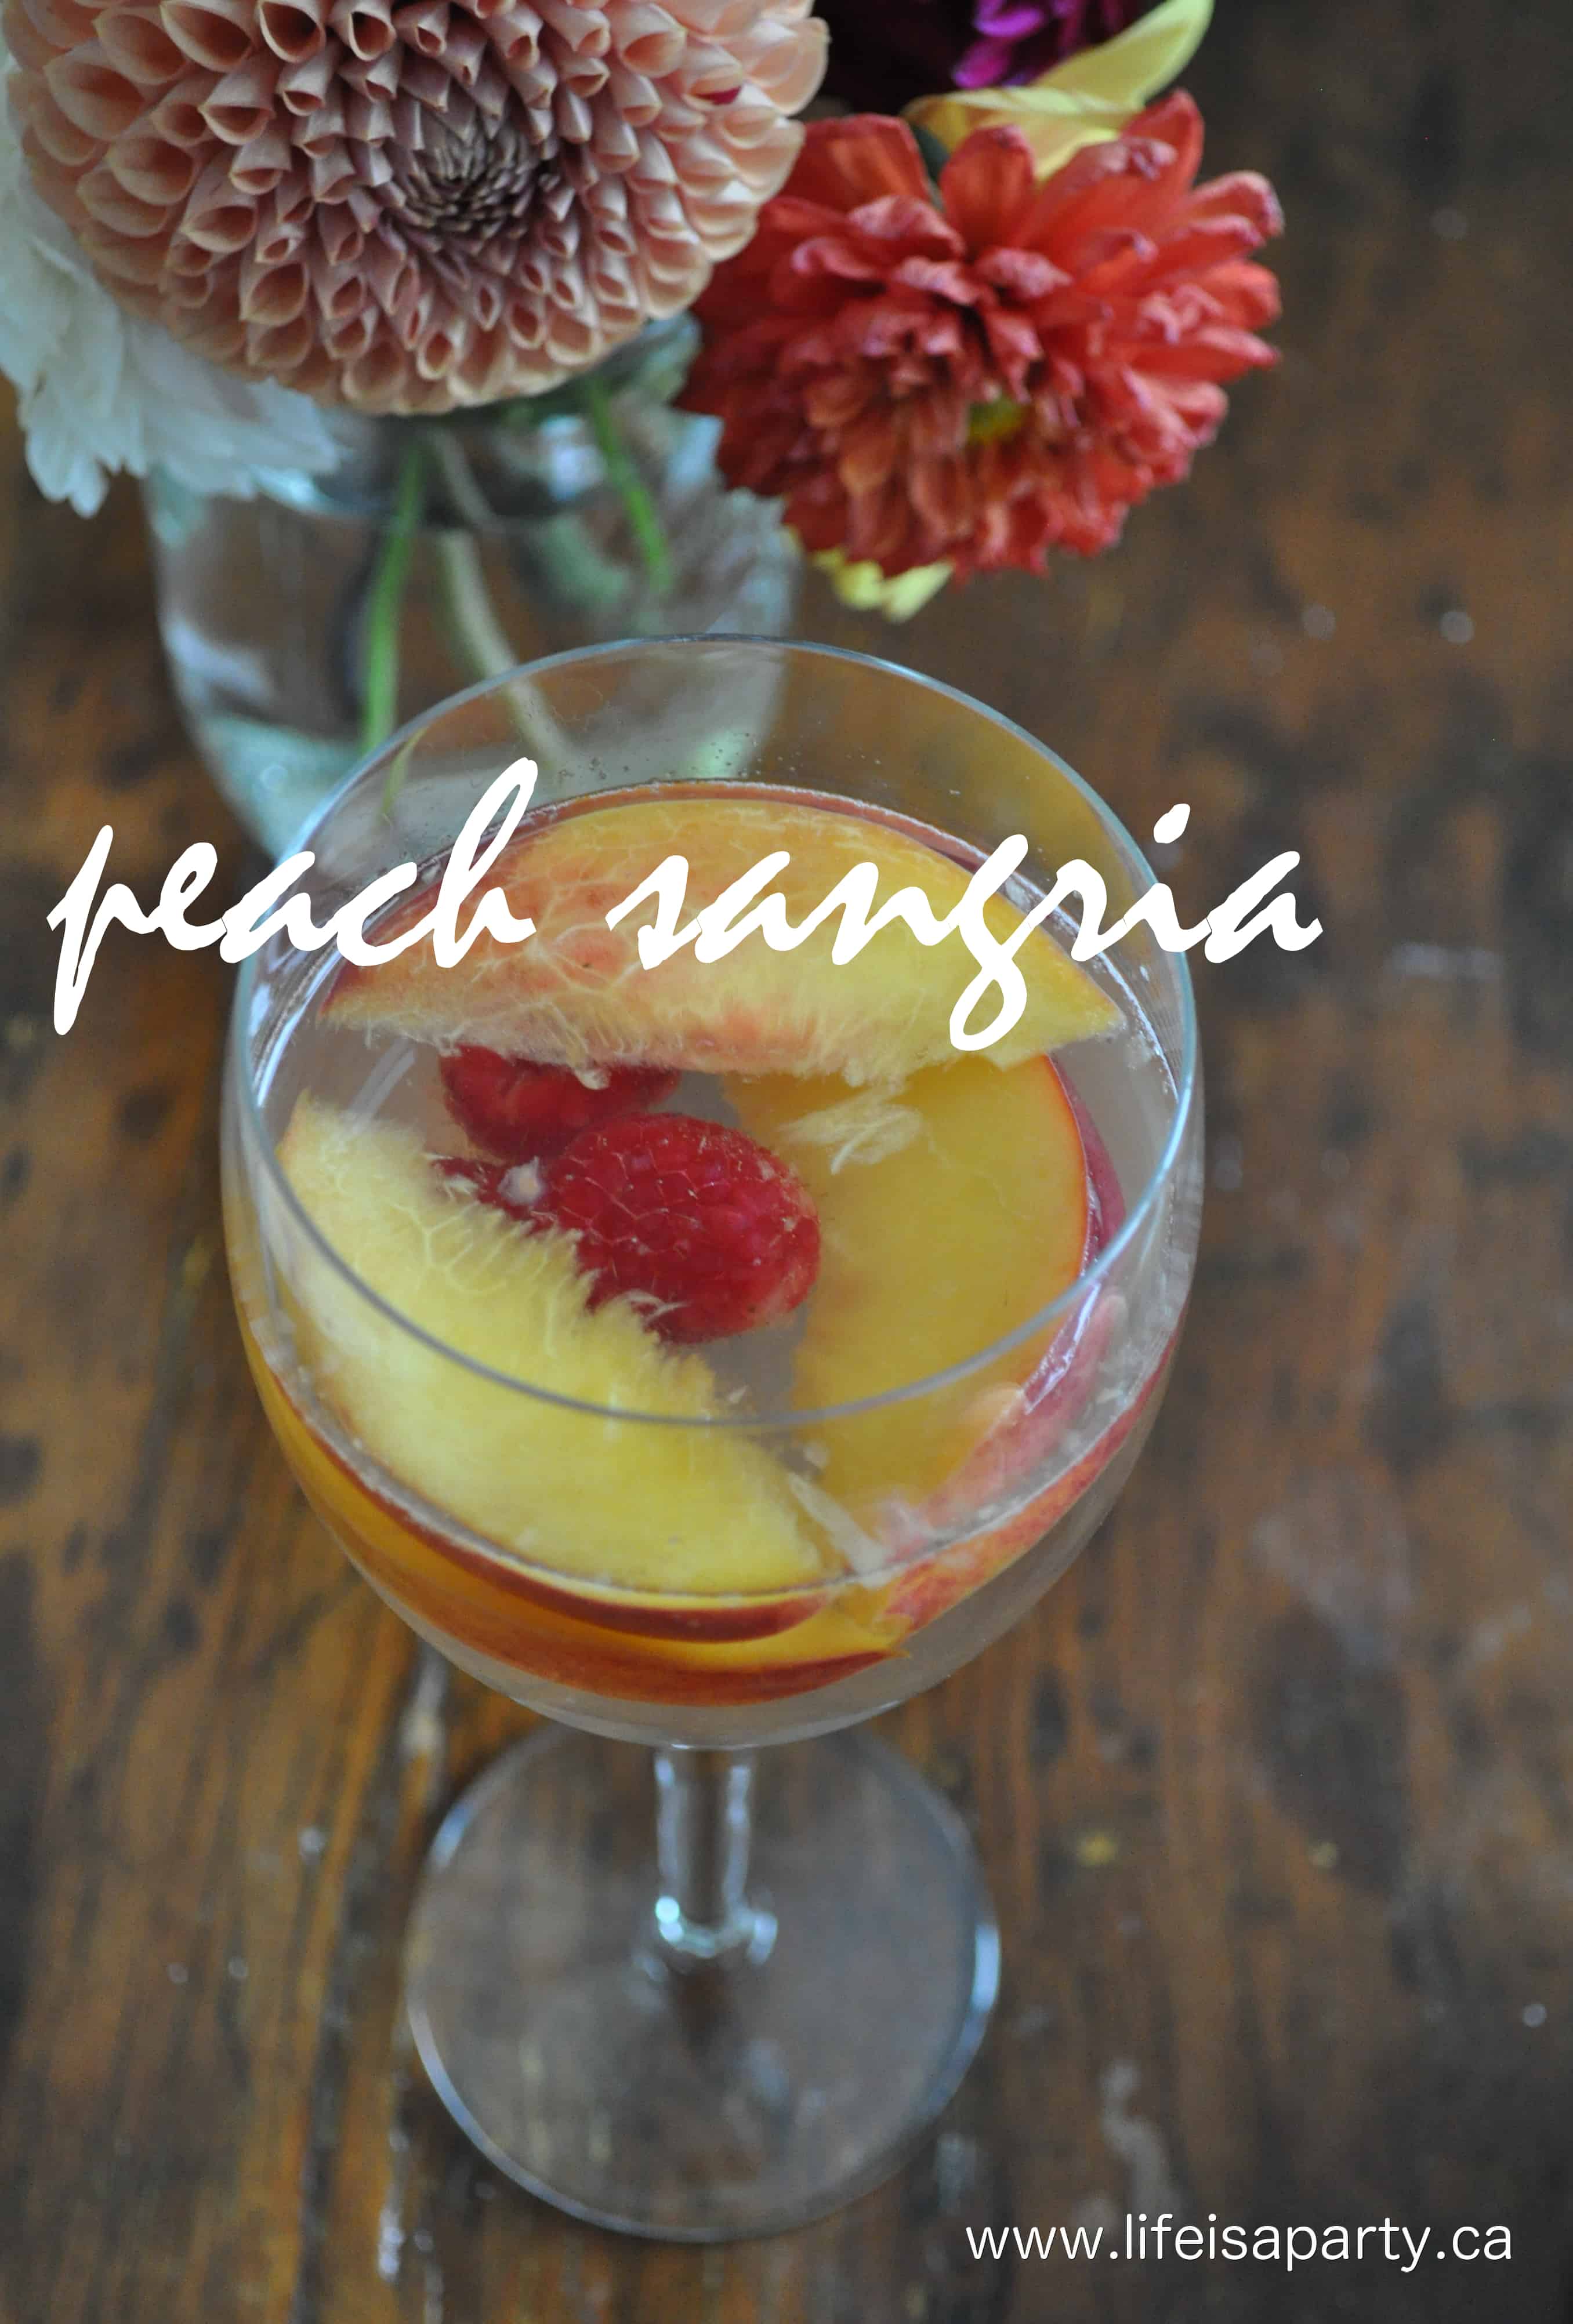 Peach Sangria: The perfect peach sangria, sweet, fruity, easy to make and delicious. Made with fresh peaches and raspberries.